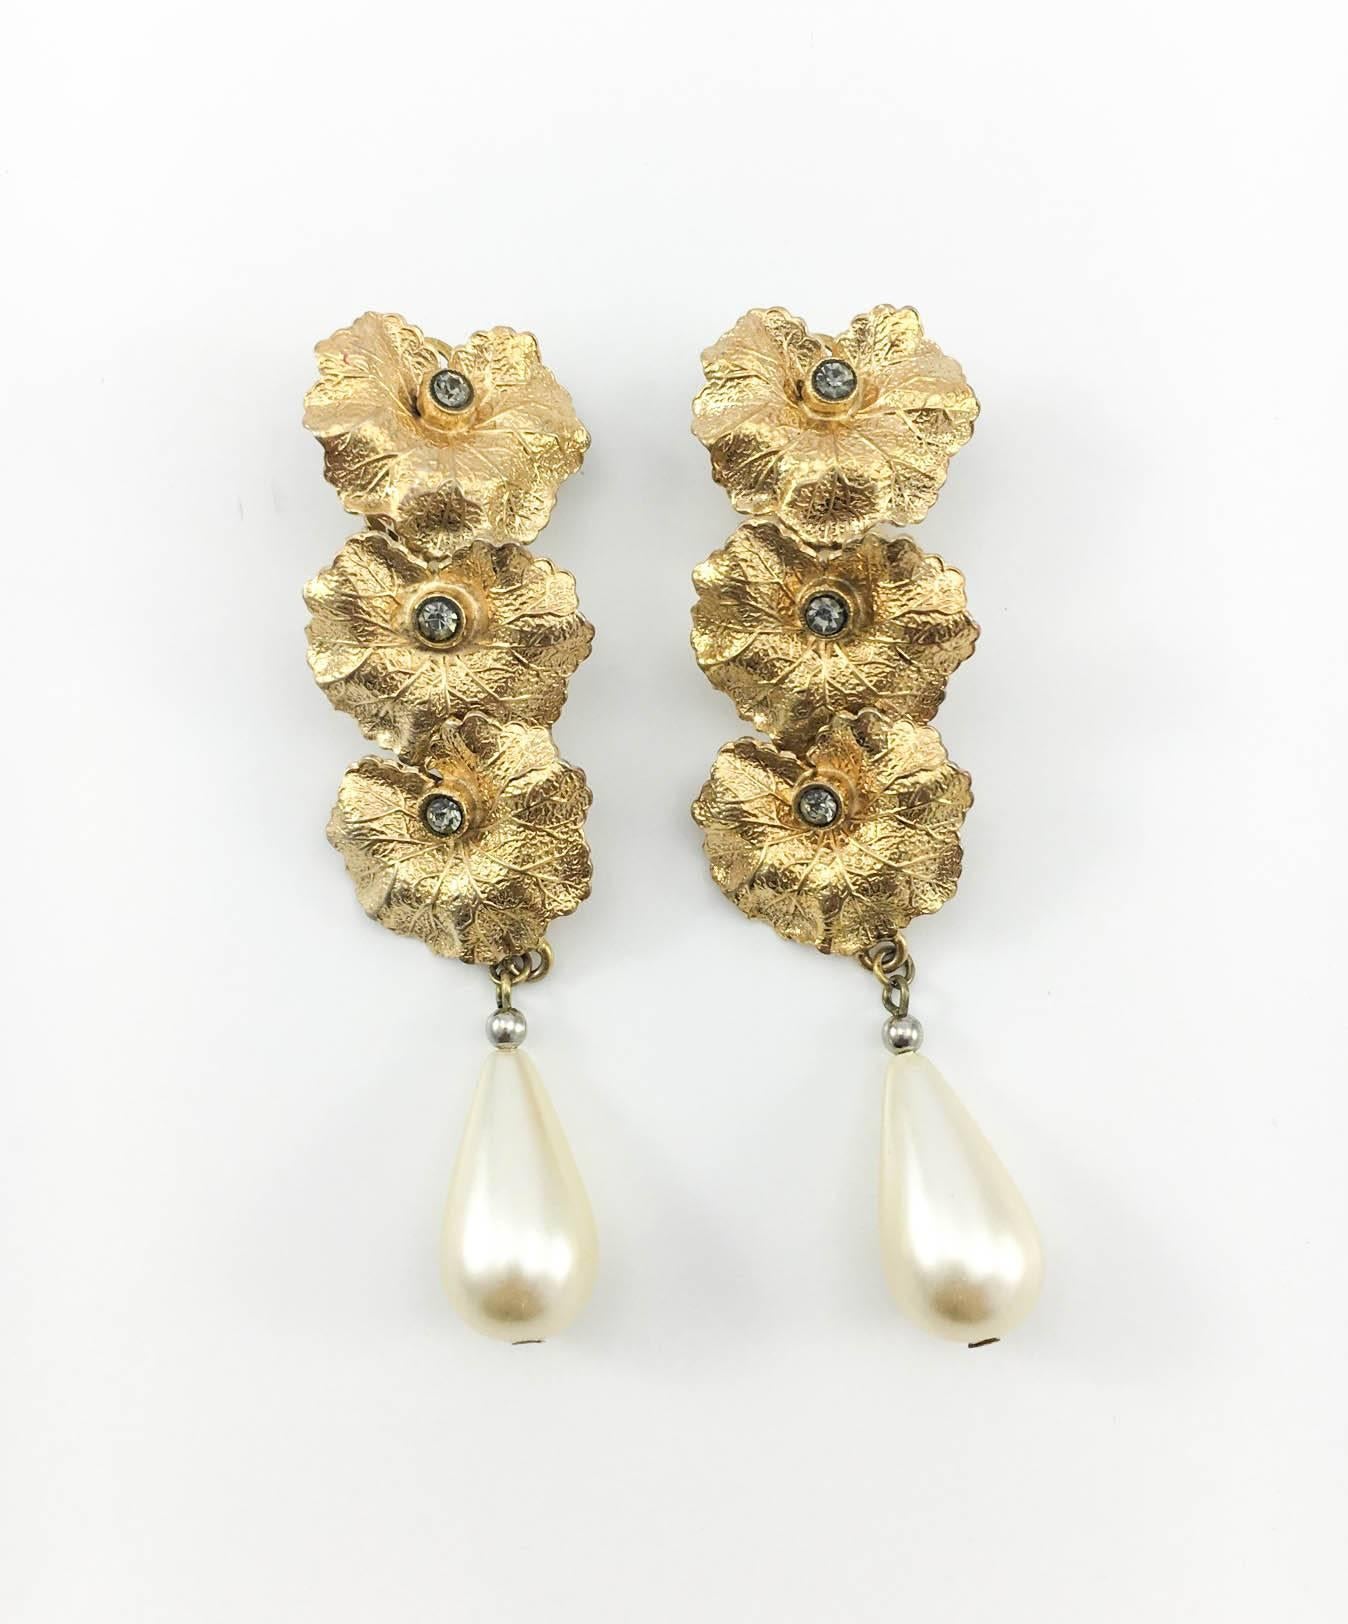 Vintage Henry Perichon Leafy Clip-on Earrings. These wonderful leafy-motif earrings are by Henry Perichon, a widely coveted jewellery designer in the 1950s and contemporary of Line Vautrin. The details on the leaves are extraordinary. On the top